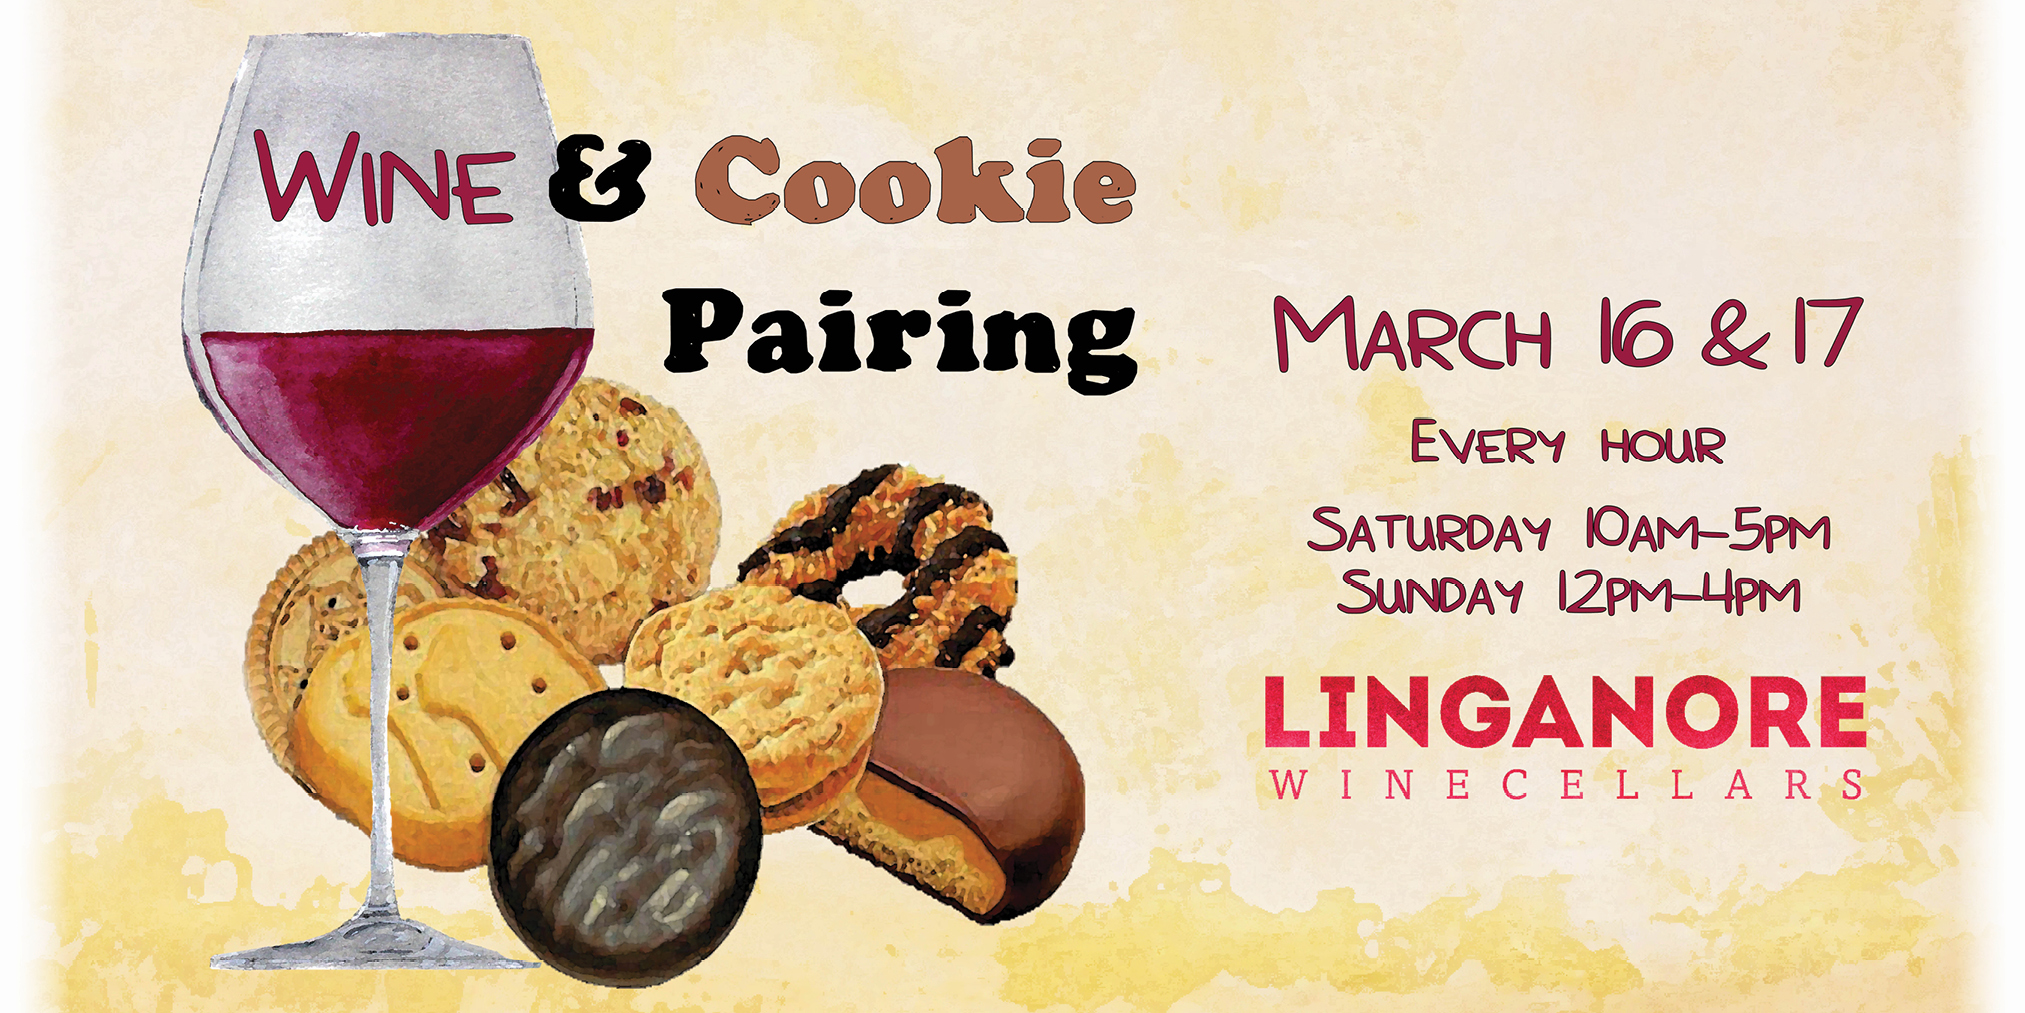 Wine and cookie pairing is March 16 and 17